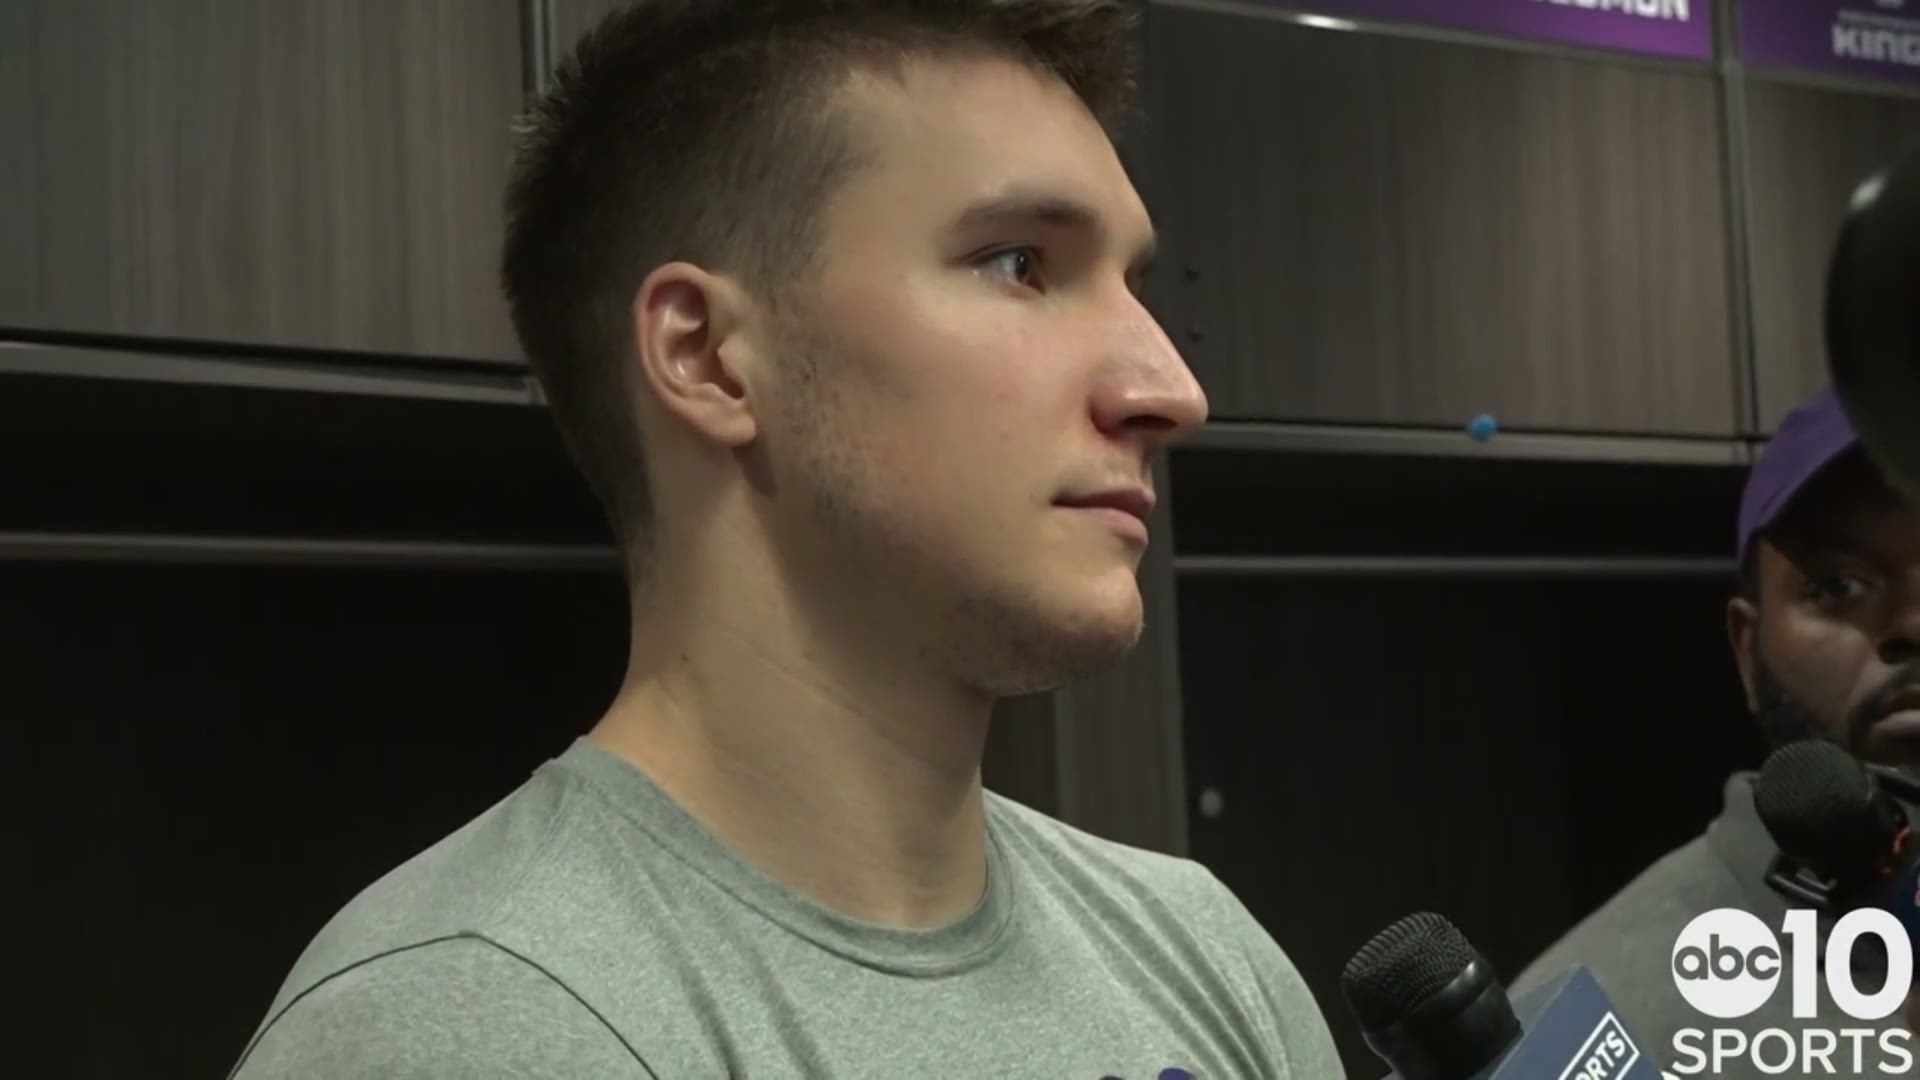 Kings guard Bogdan Bogdanovic talks about his 25 point and 10 assist performance in Tuesday’s 107-99 victory over the Portland Trail Blazers.